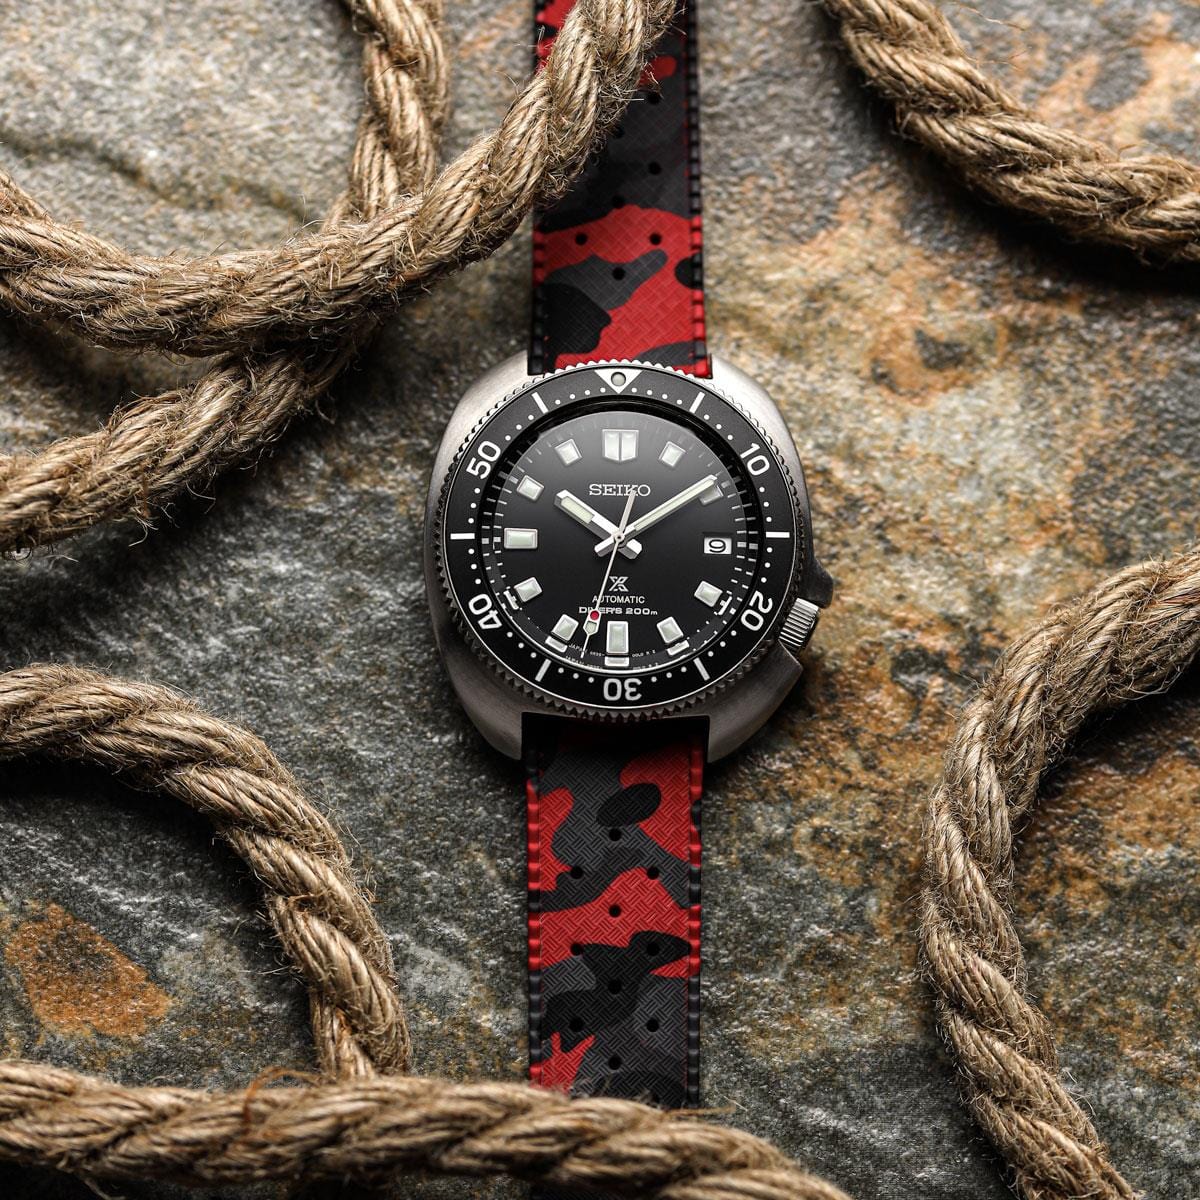 ZULUDIVER Tropic Style FKM Rubber Watch Strap - Camouflage Red